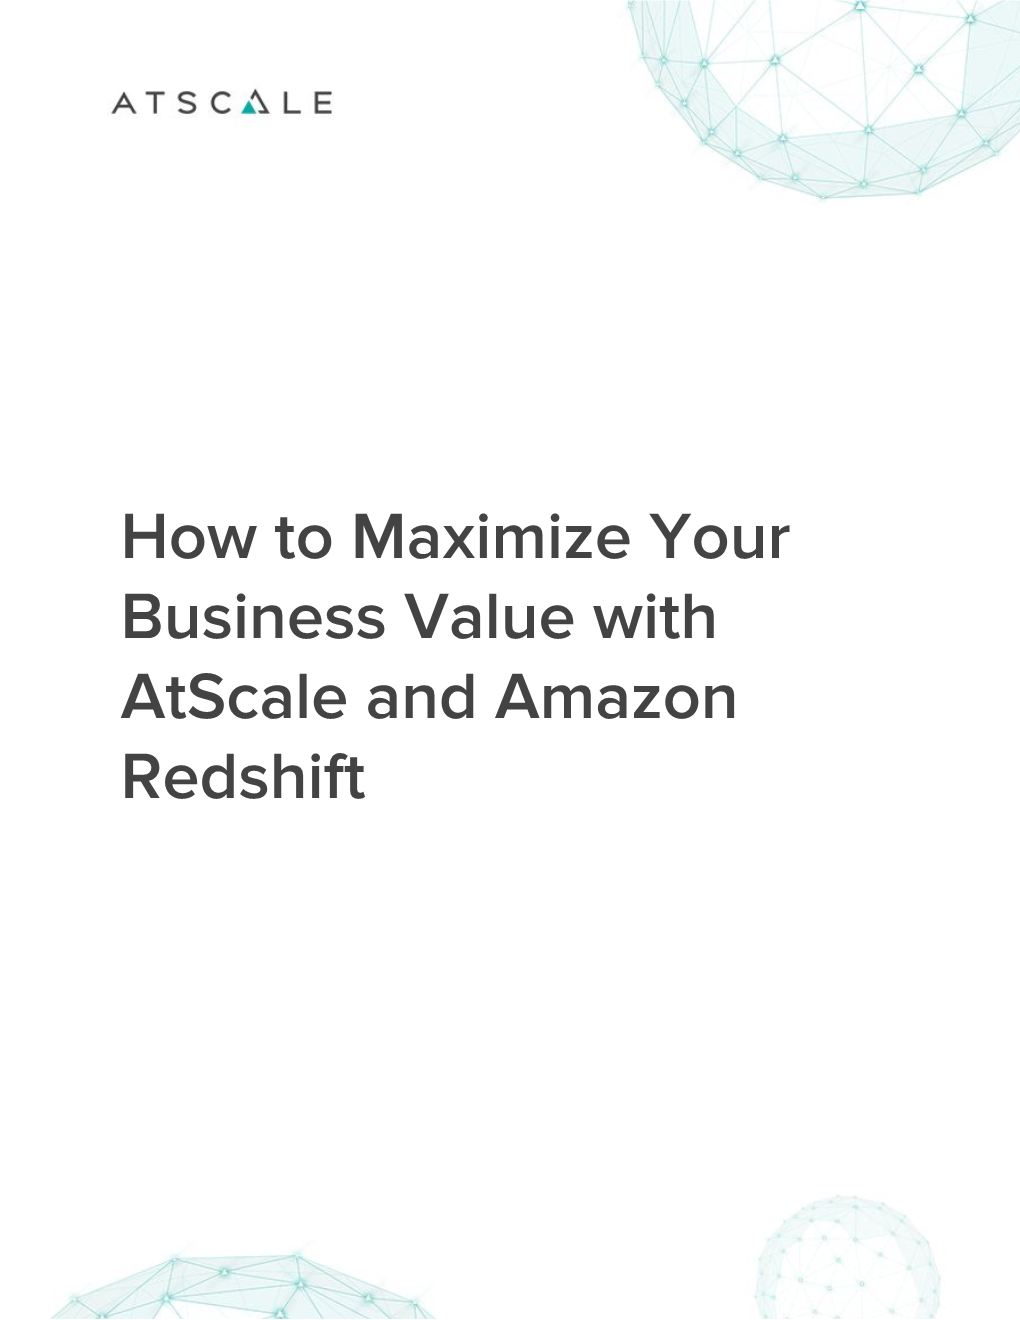 How to Maximize Your Business Value with Atscale and Amazon Redshift